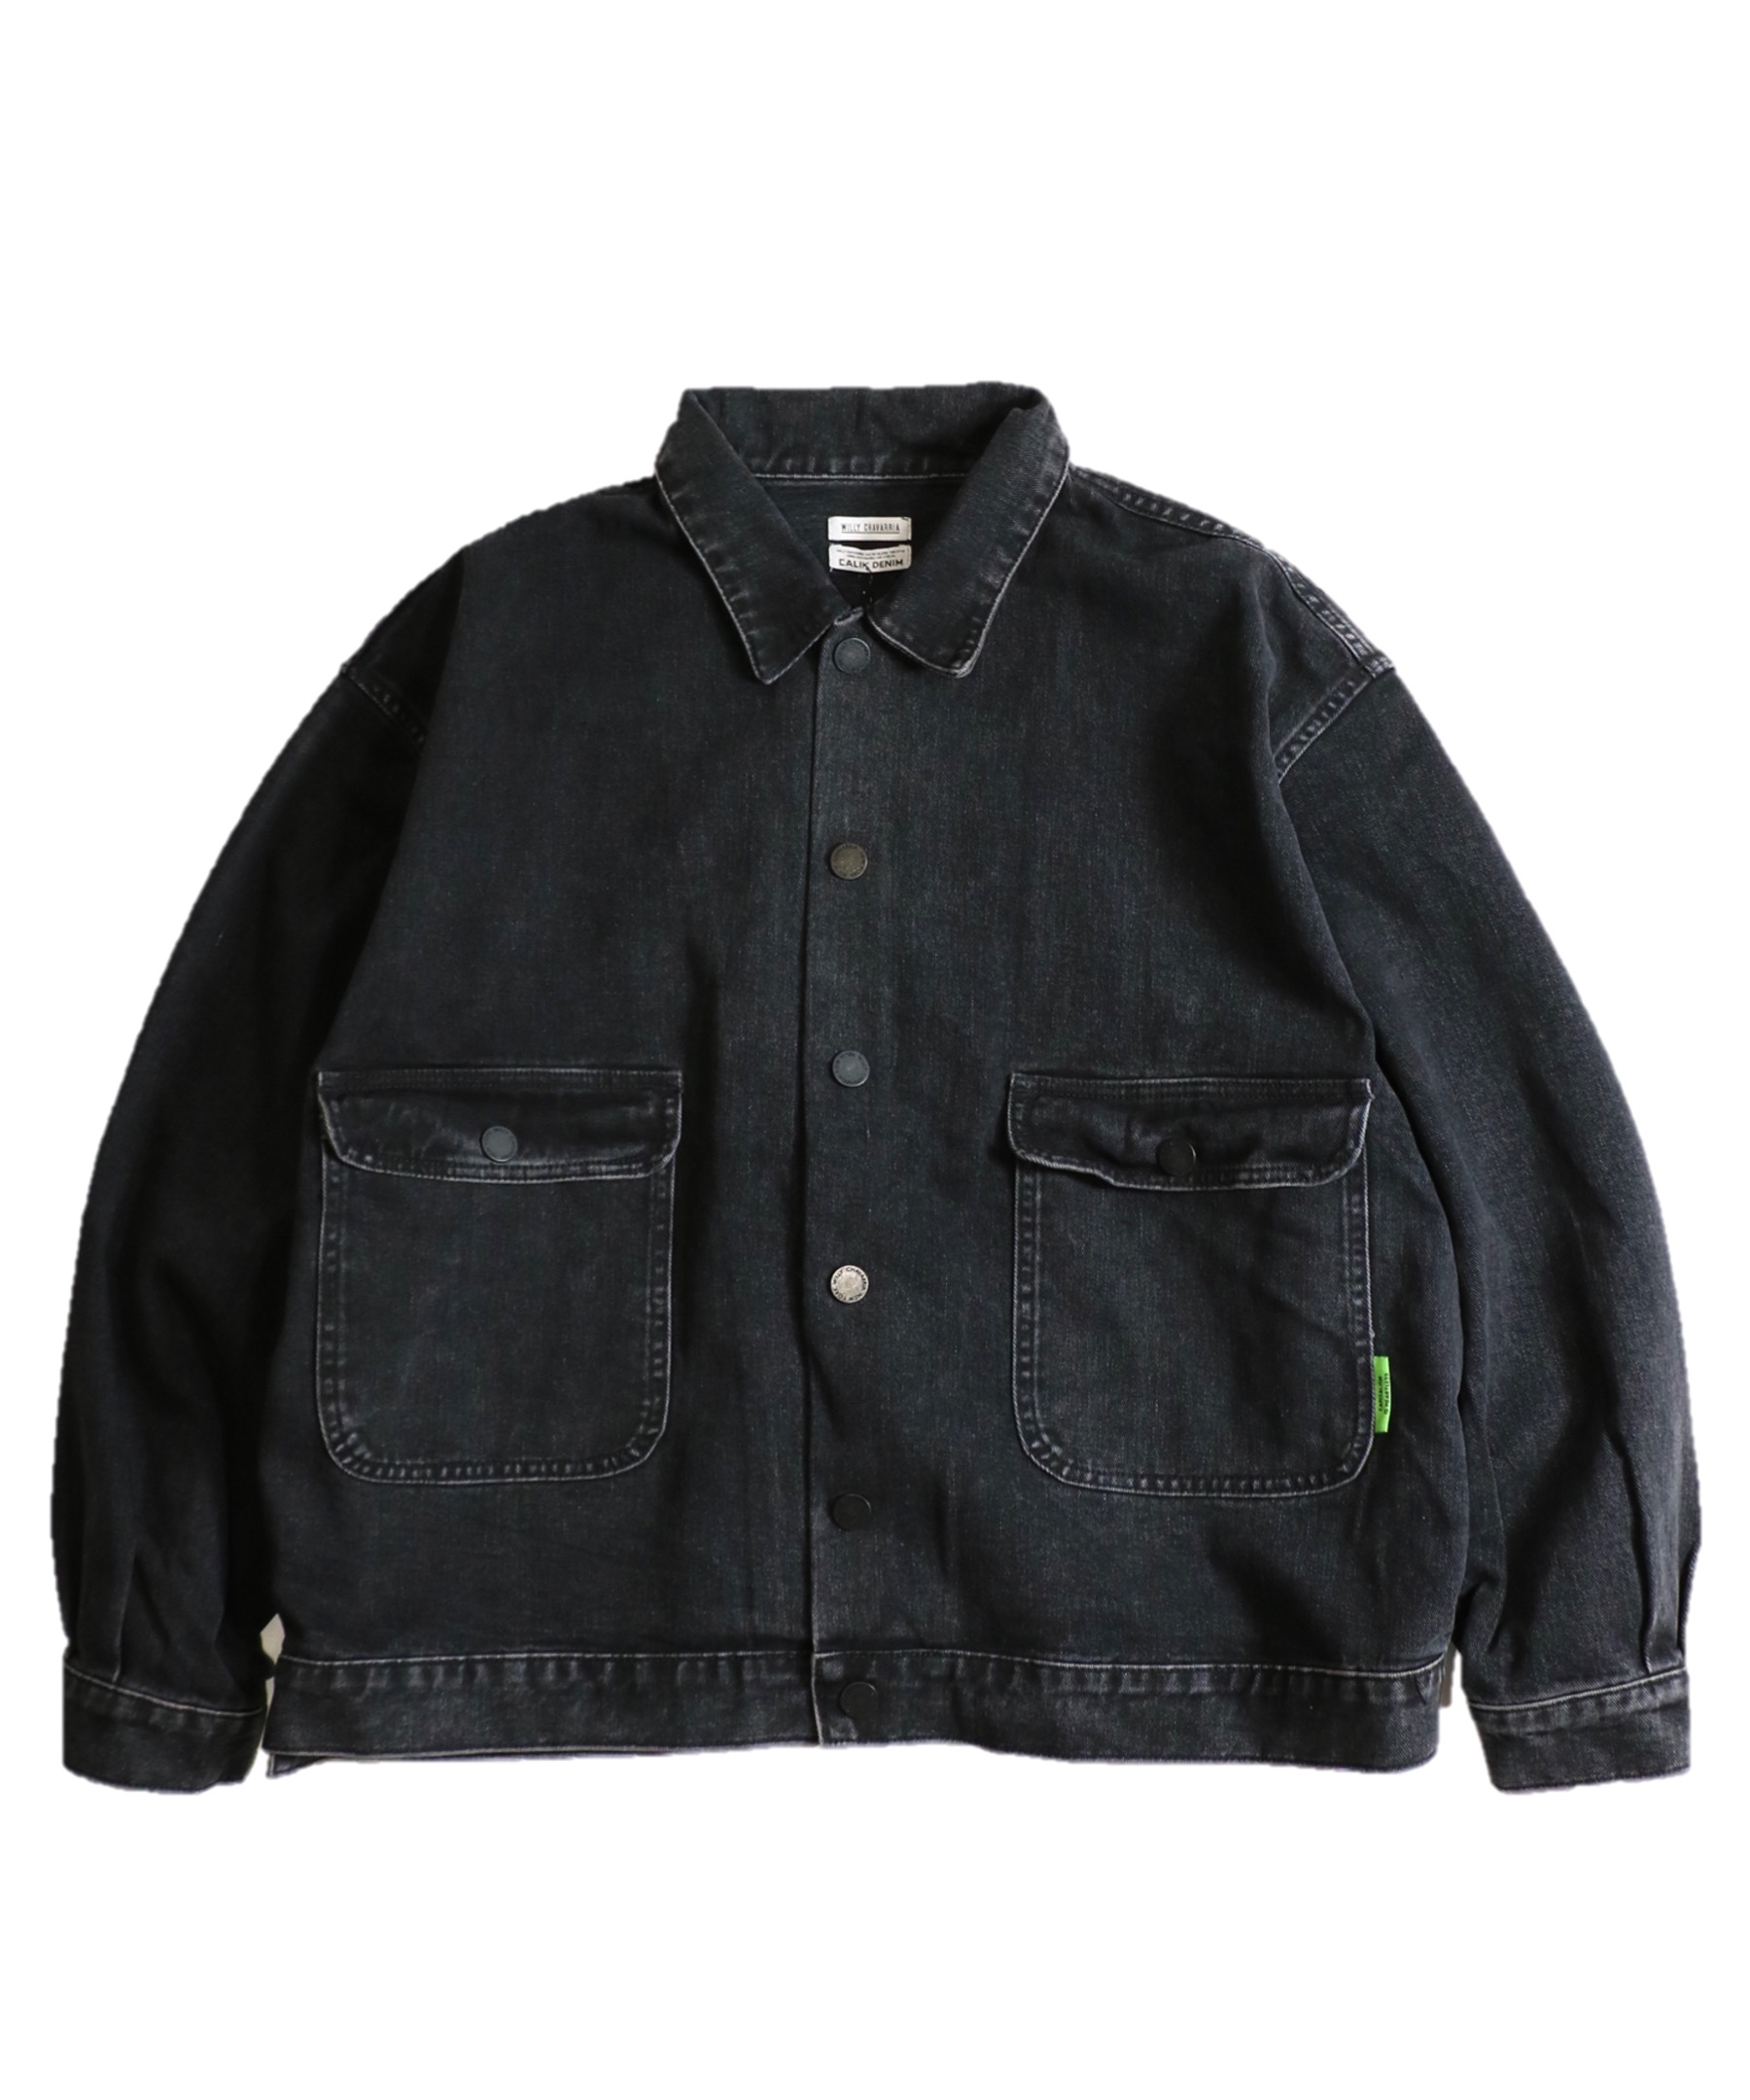 WILLY CHAVARRIA / SILVERLAKE JACKET – C.E.L.STORE NOTE